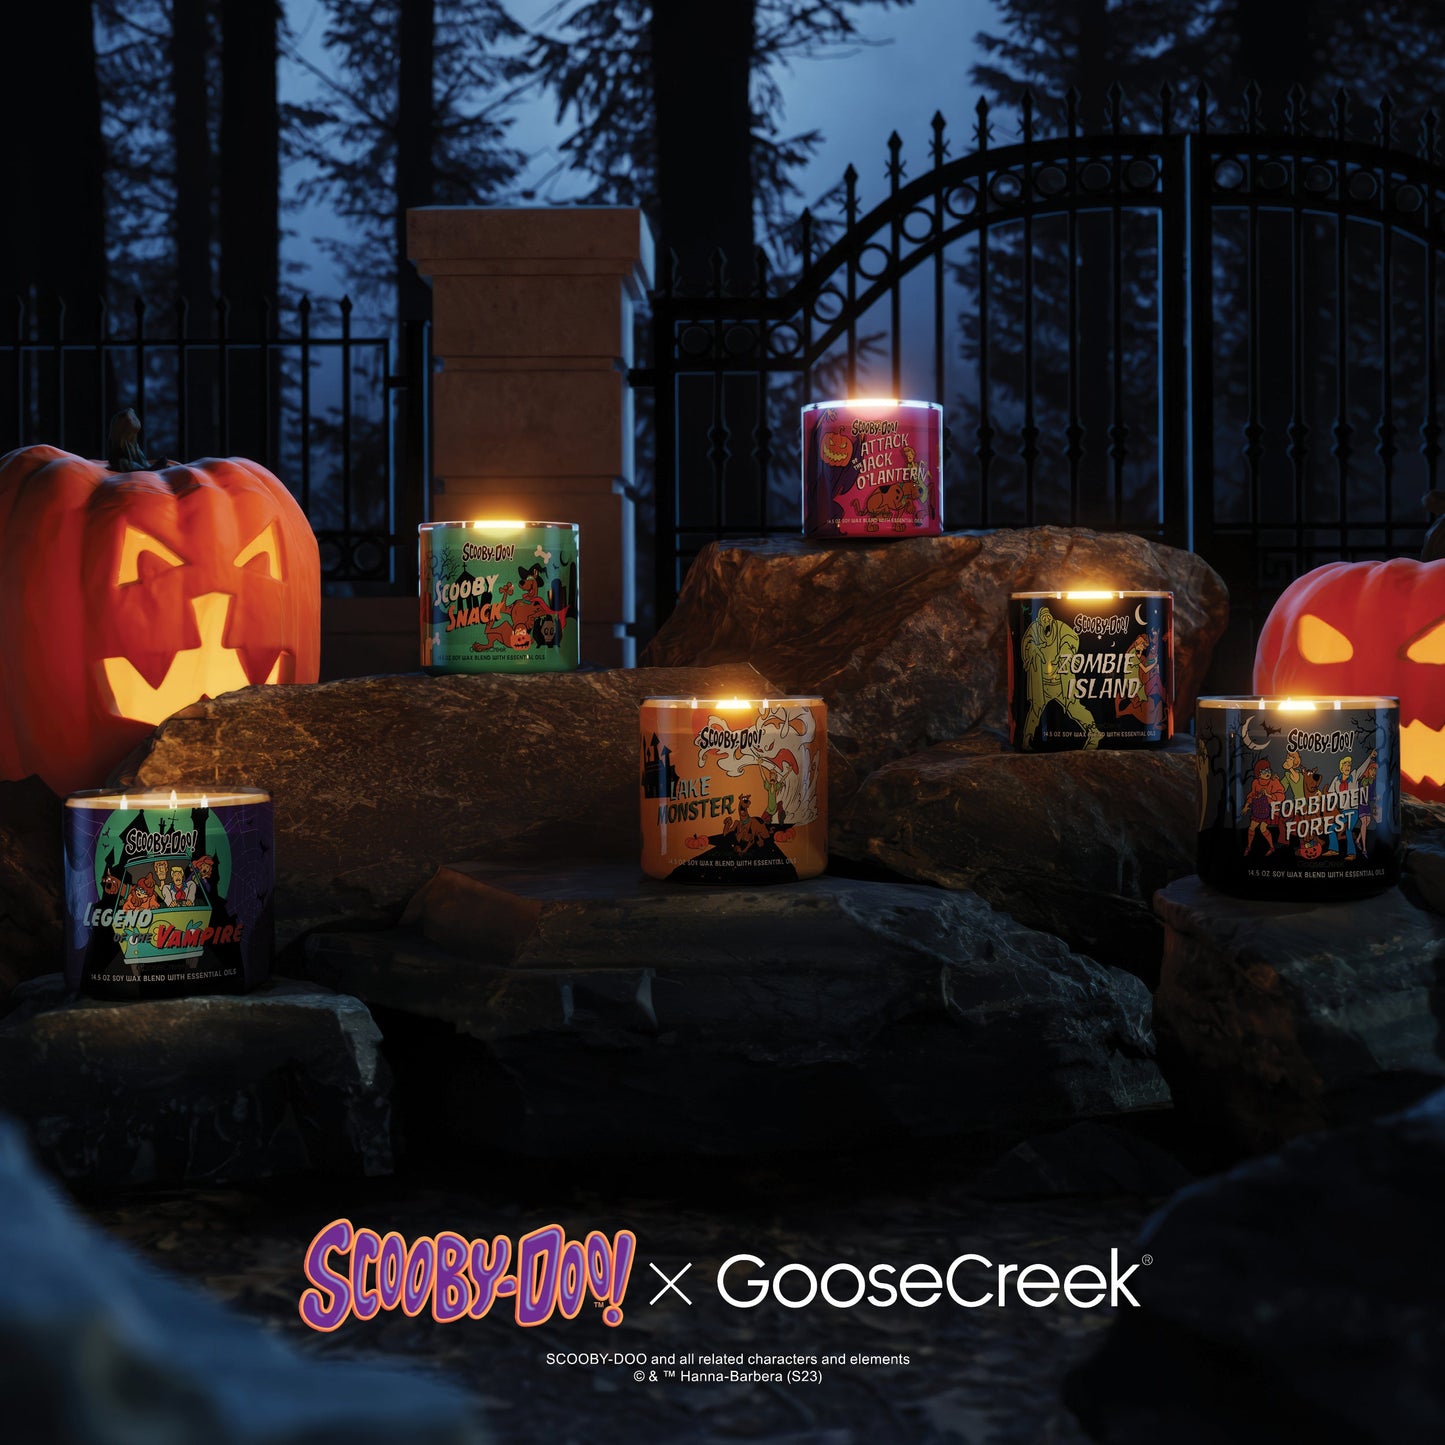 Legend of the Vampire 3-Wick Scooby-Doo Candle